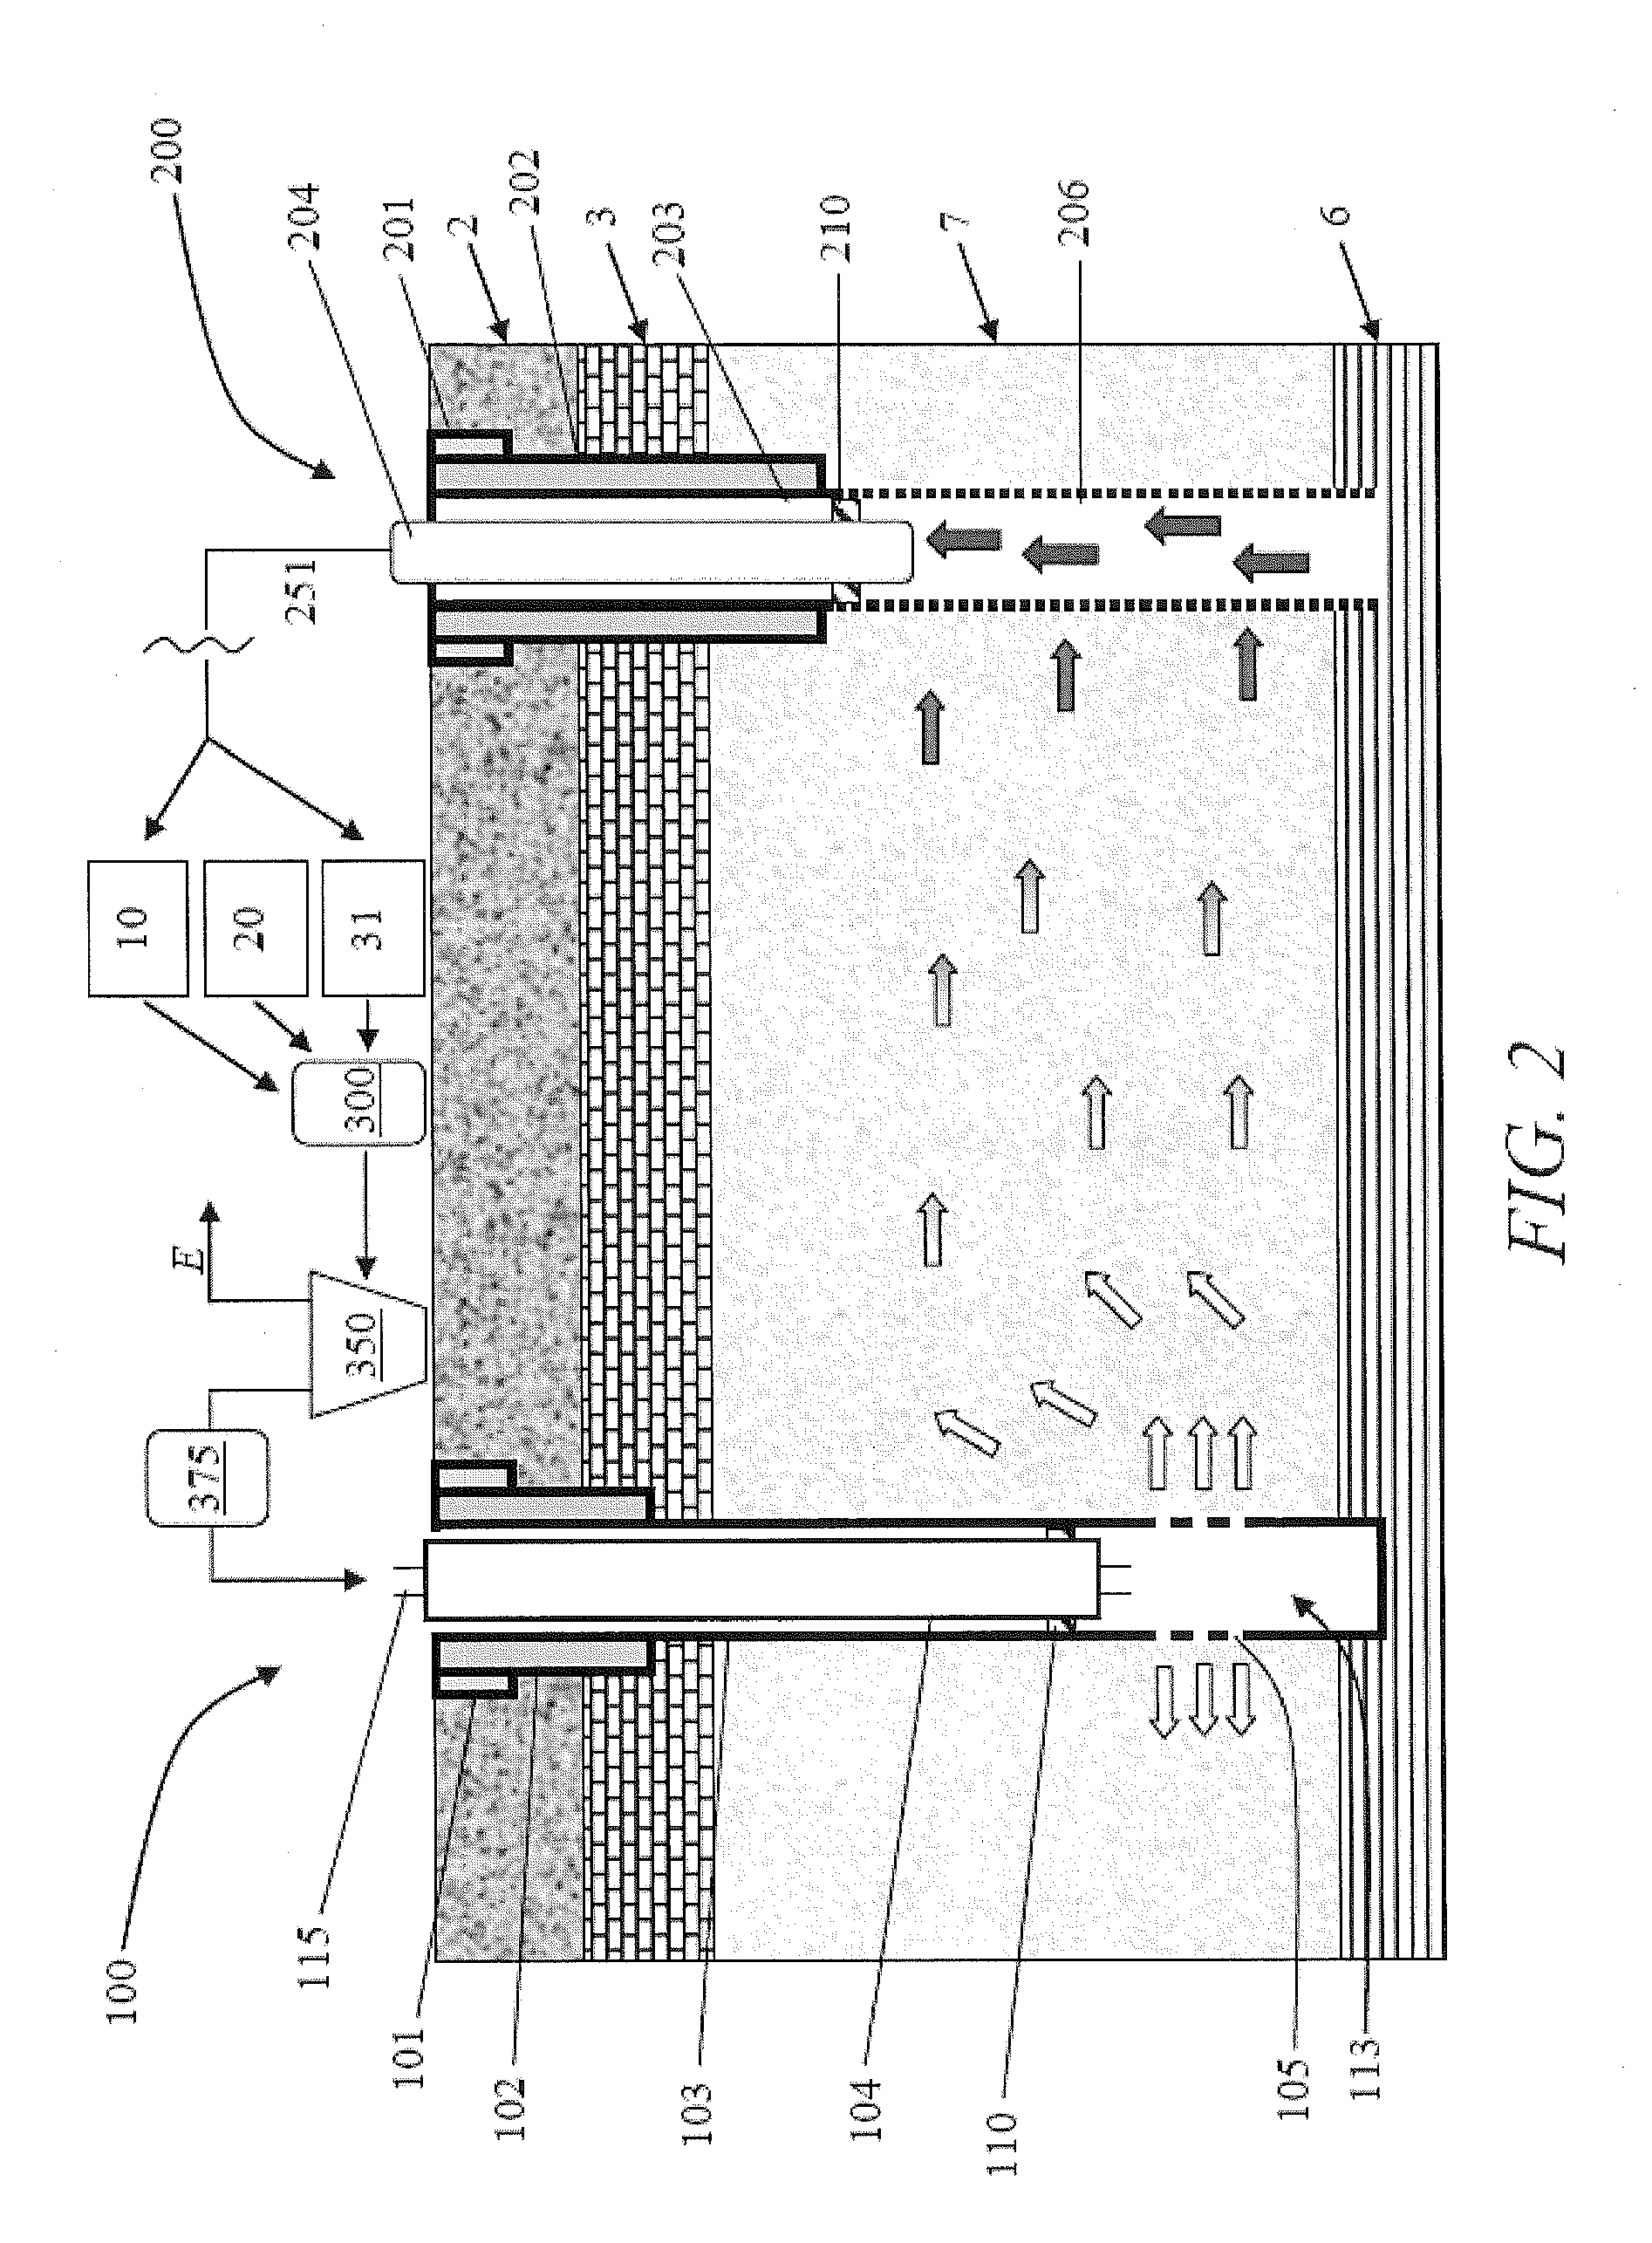 Method of using carbon dioxide in recovery of formation deposits